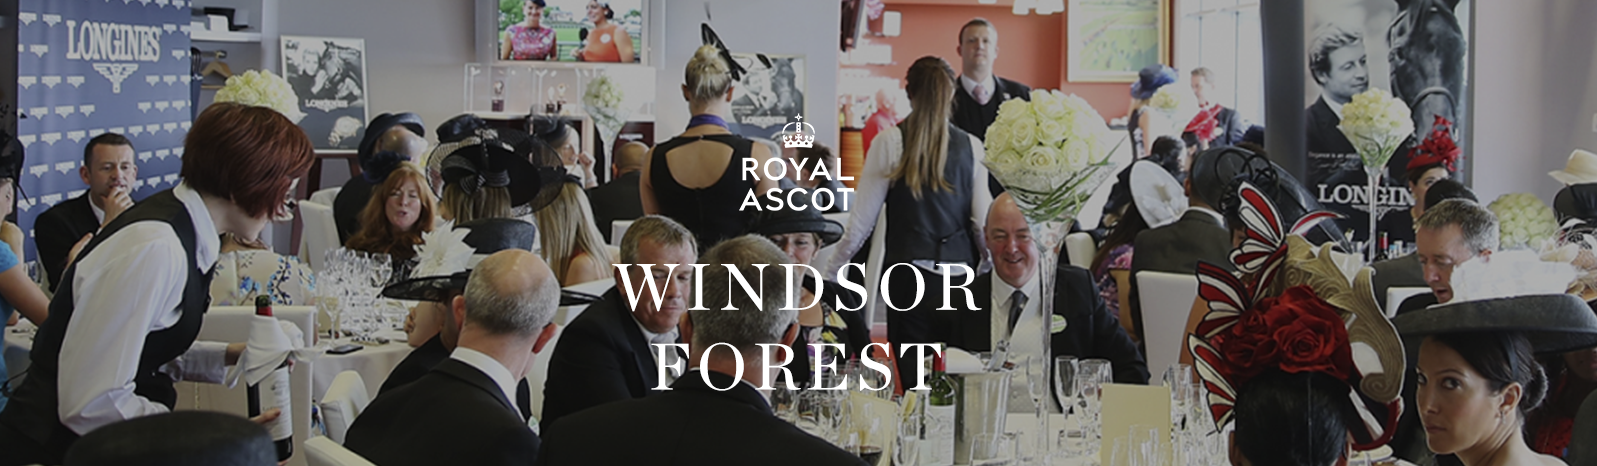 Windsor forest Hospitality package Ascot